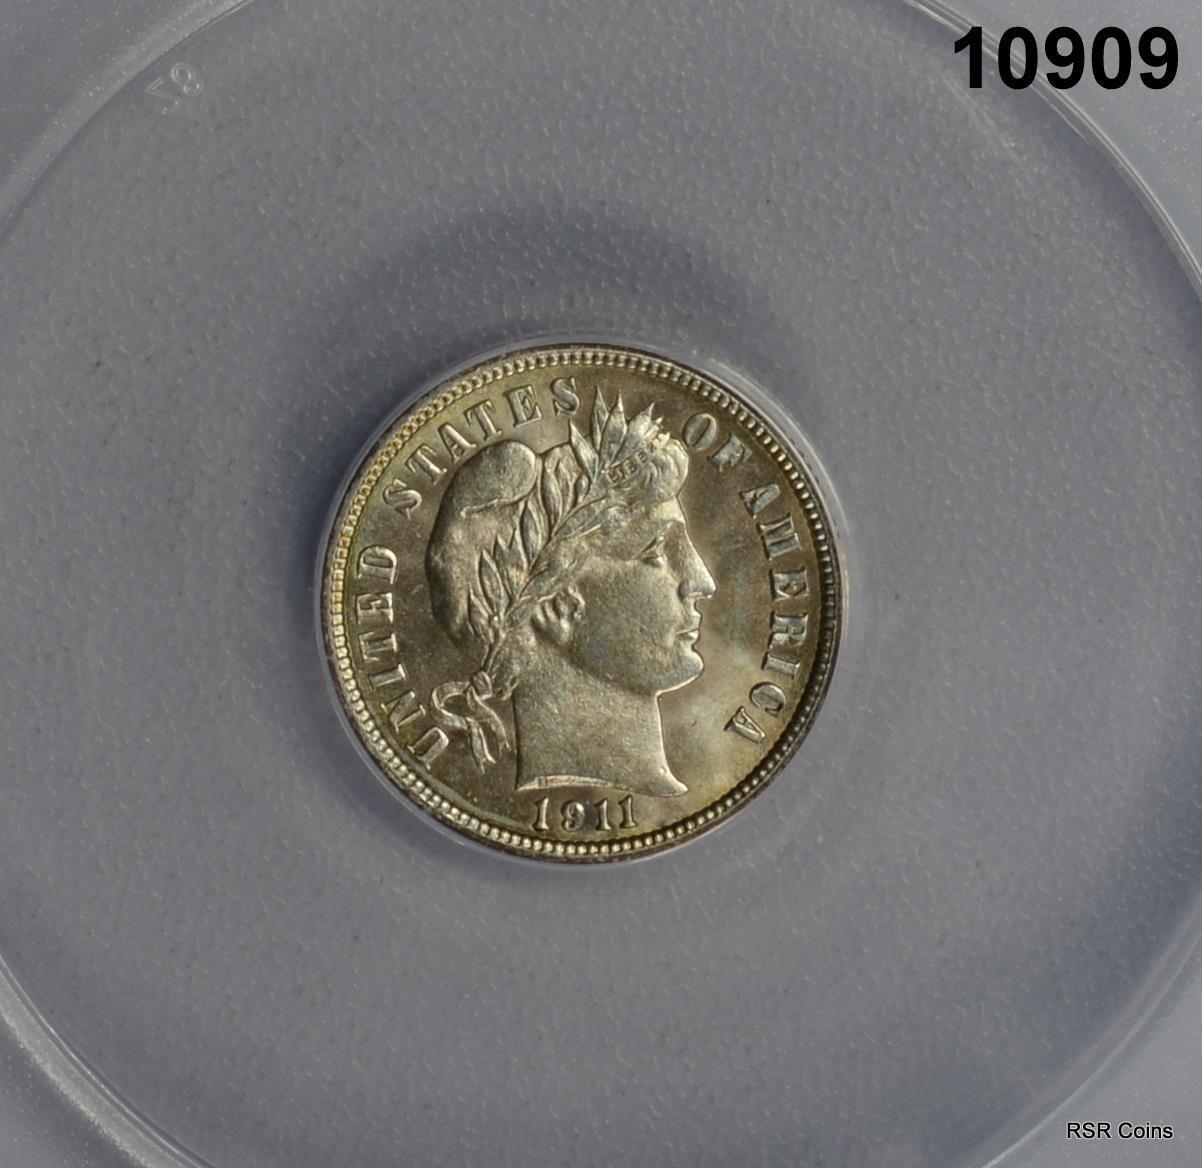 1911 BARBER DIME ANACS CERTIFIED MS64 LOOKS GEM!! WOW!! #10909